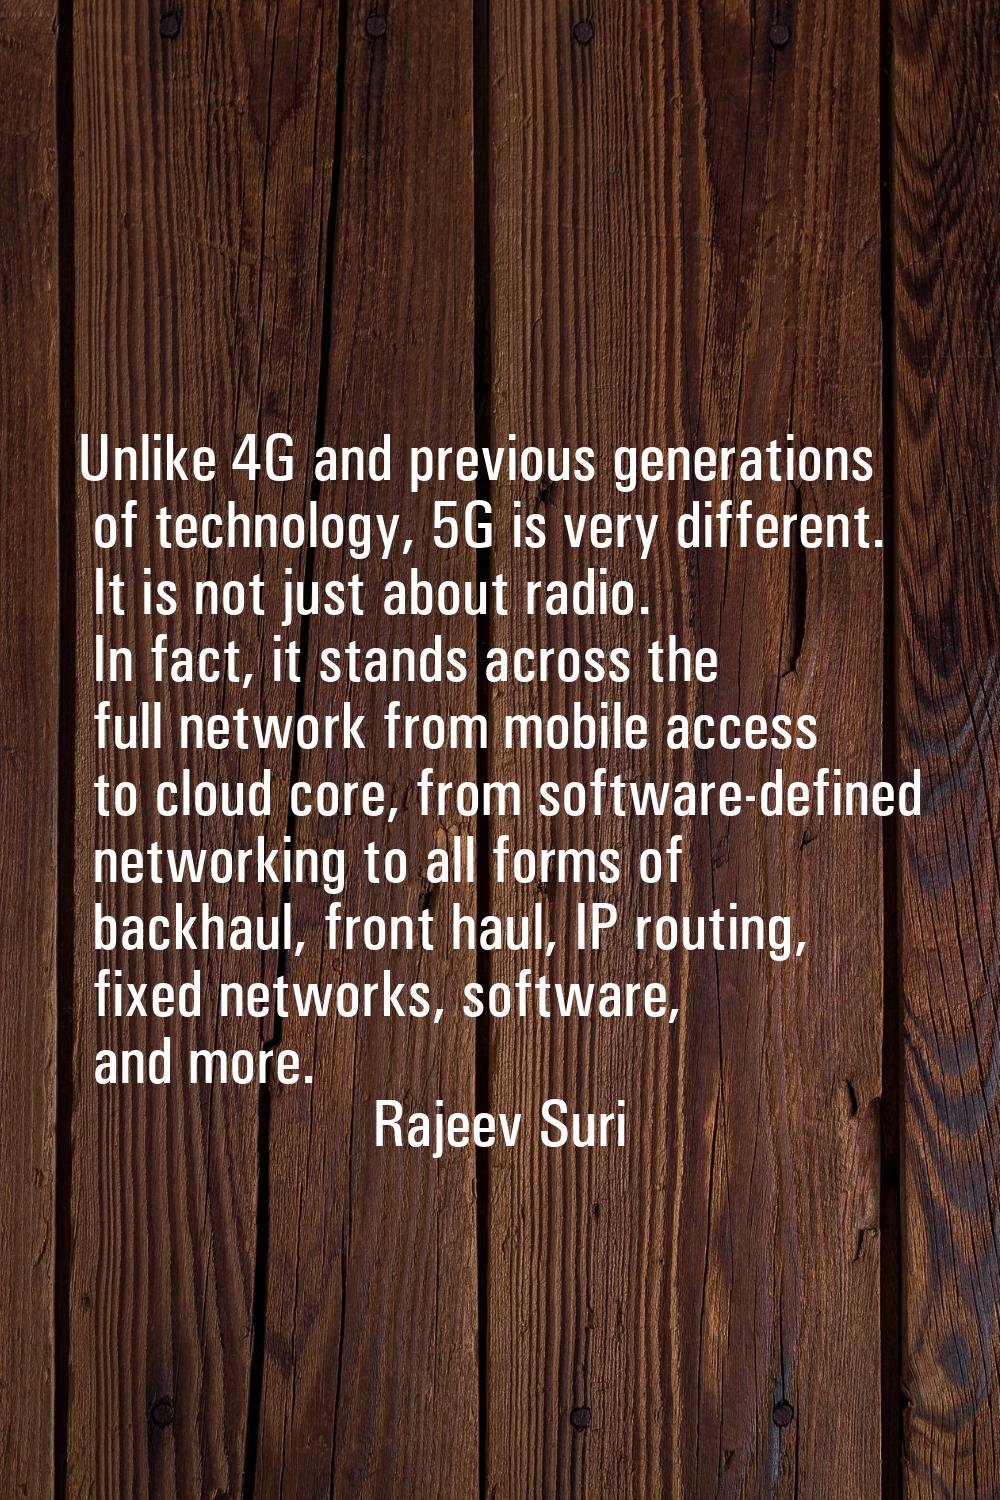 Unlike 4G and previous generations of technology, 5G is very different. It is not just about radio.